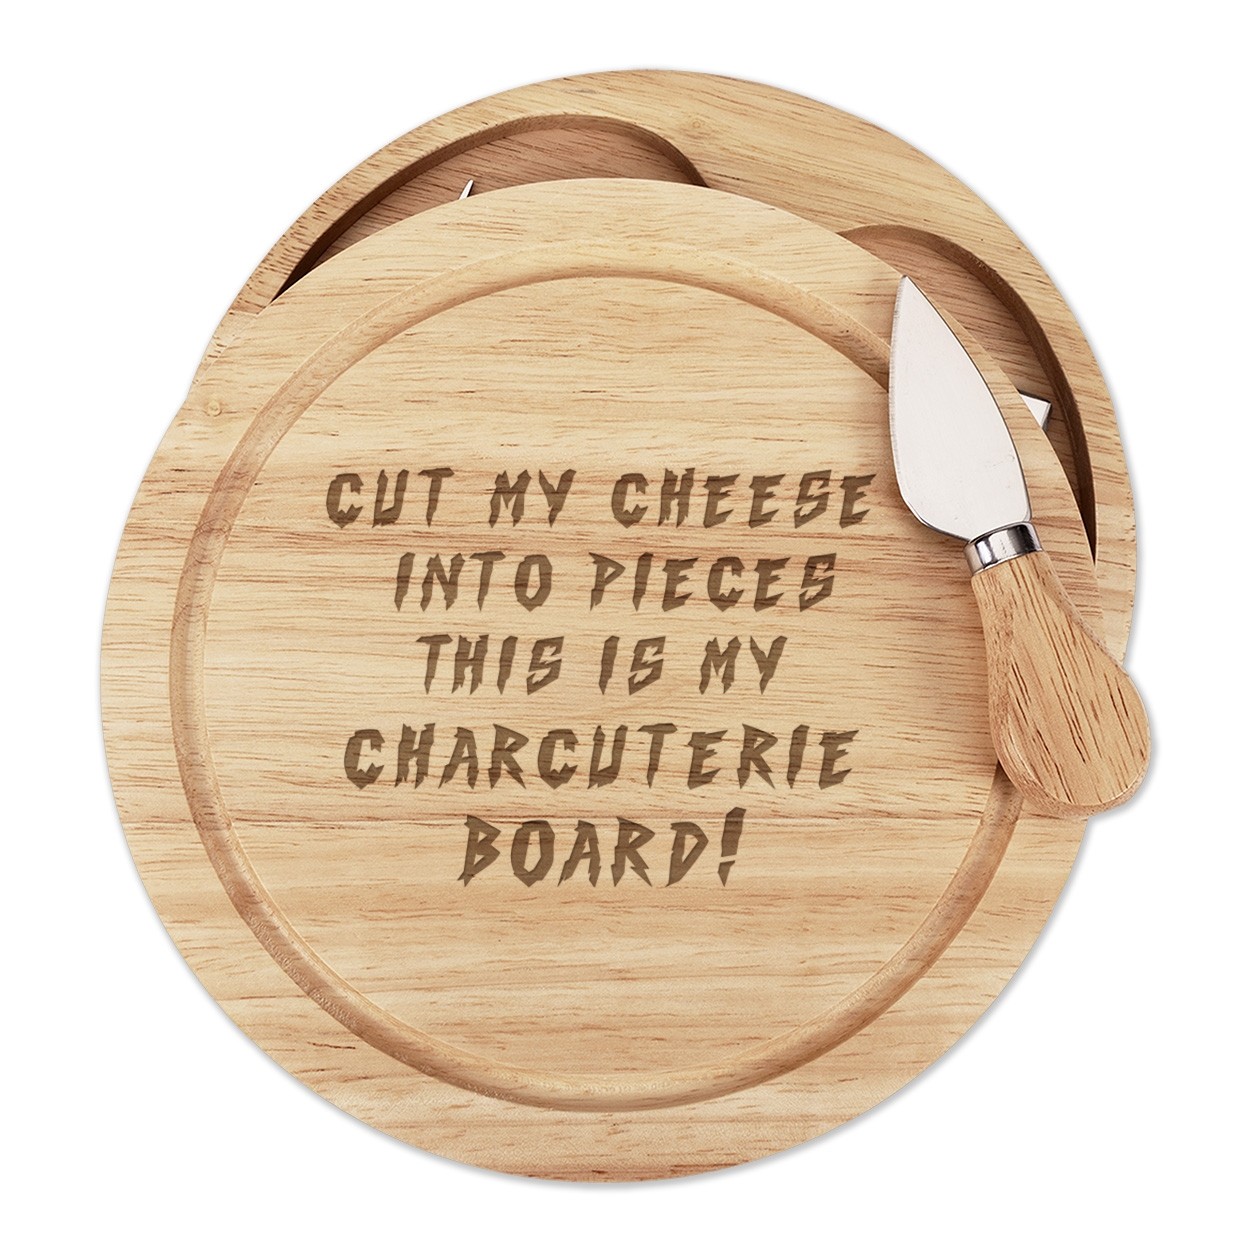 Cut My Cheese Into Pieces This Is My Charcuterie Board Wooden Cheese Board Set 4 Knives Food